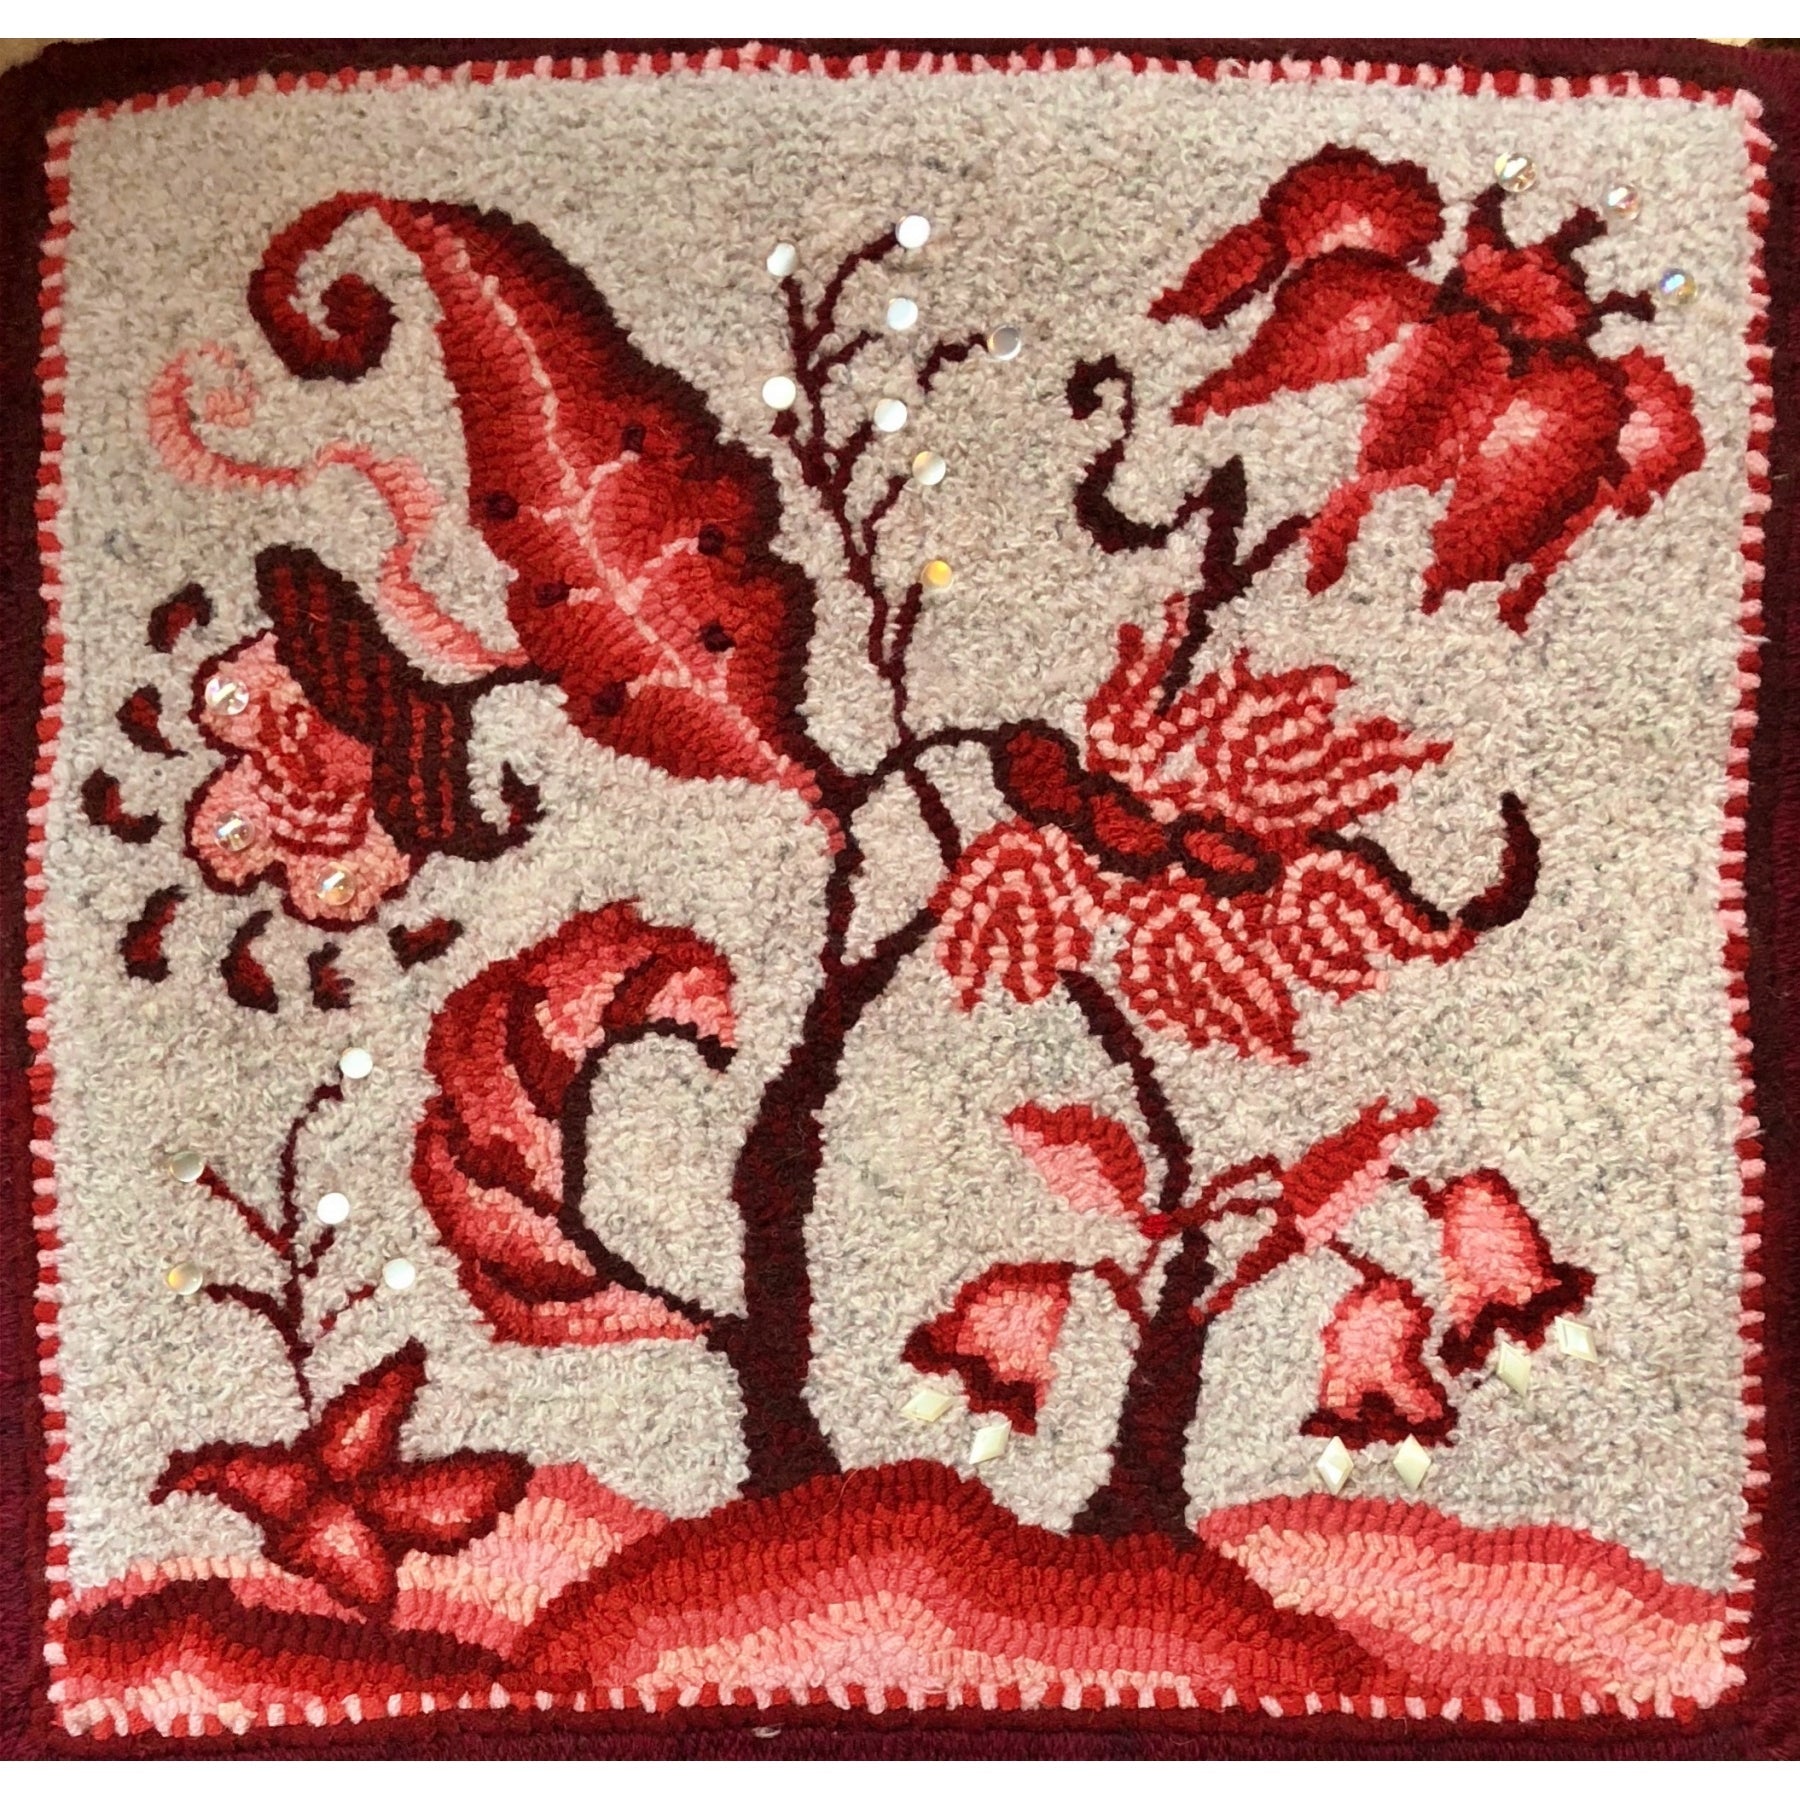 Izette Crewel, rug hooked by Melissa Pattacini